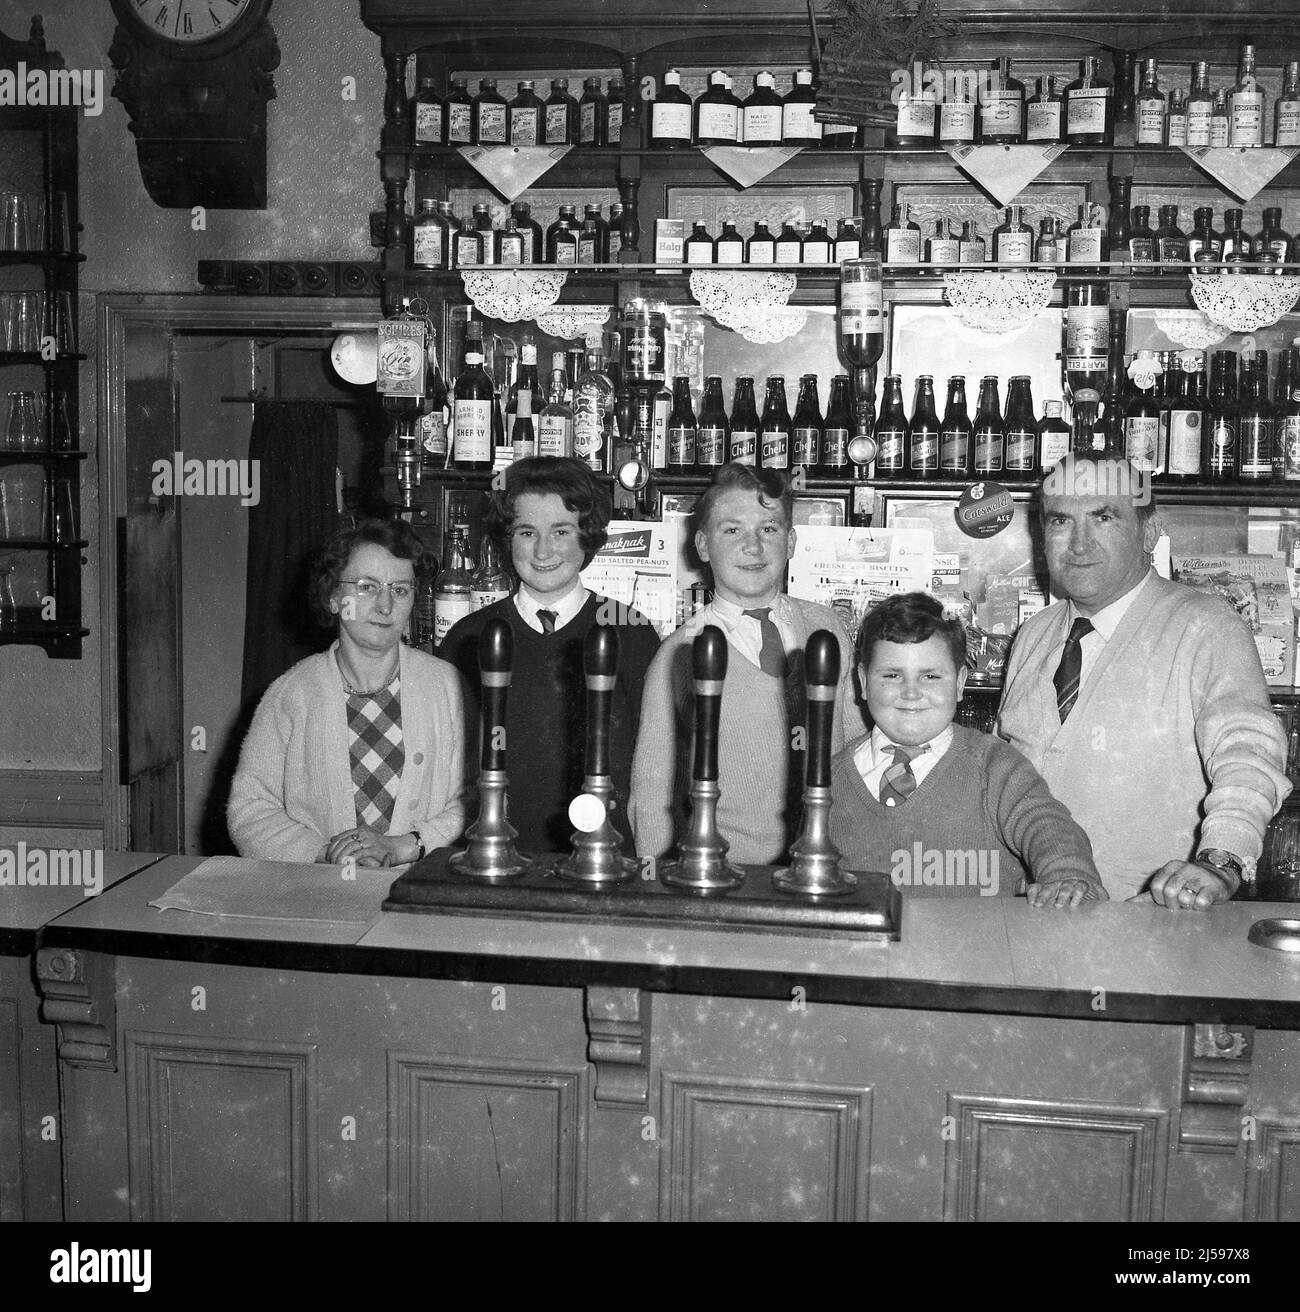 1962, historical, three schoolchildren standing behind the bar with their grandparents, the landlord and landlady of the Padding Pub, Cheltenham, Gloucester, England, UK. Stock Photo